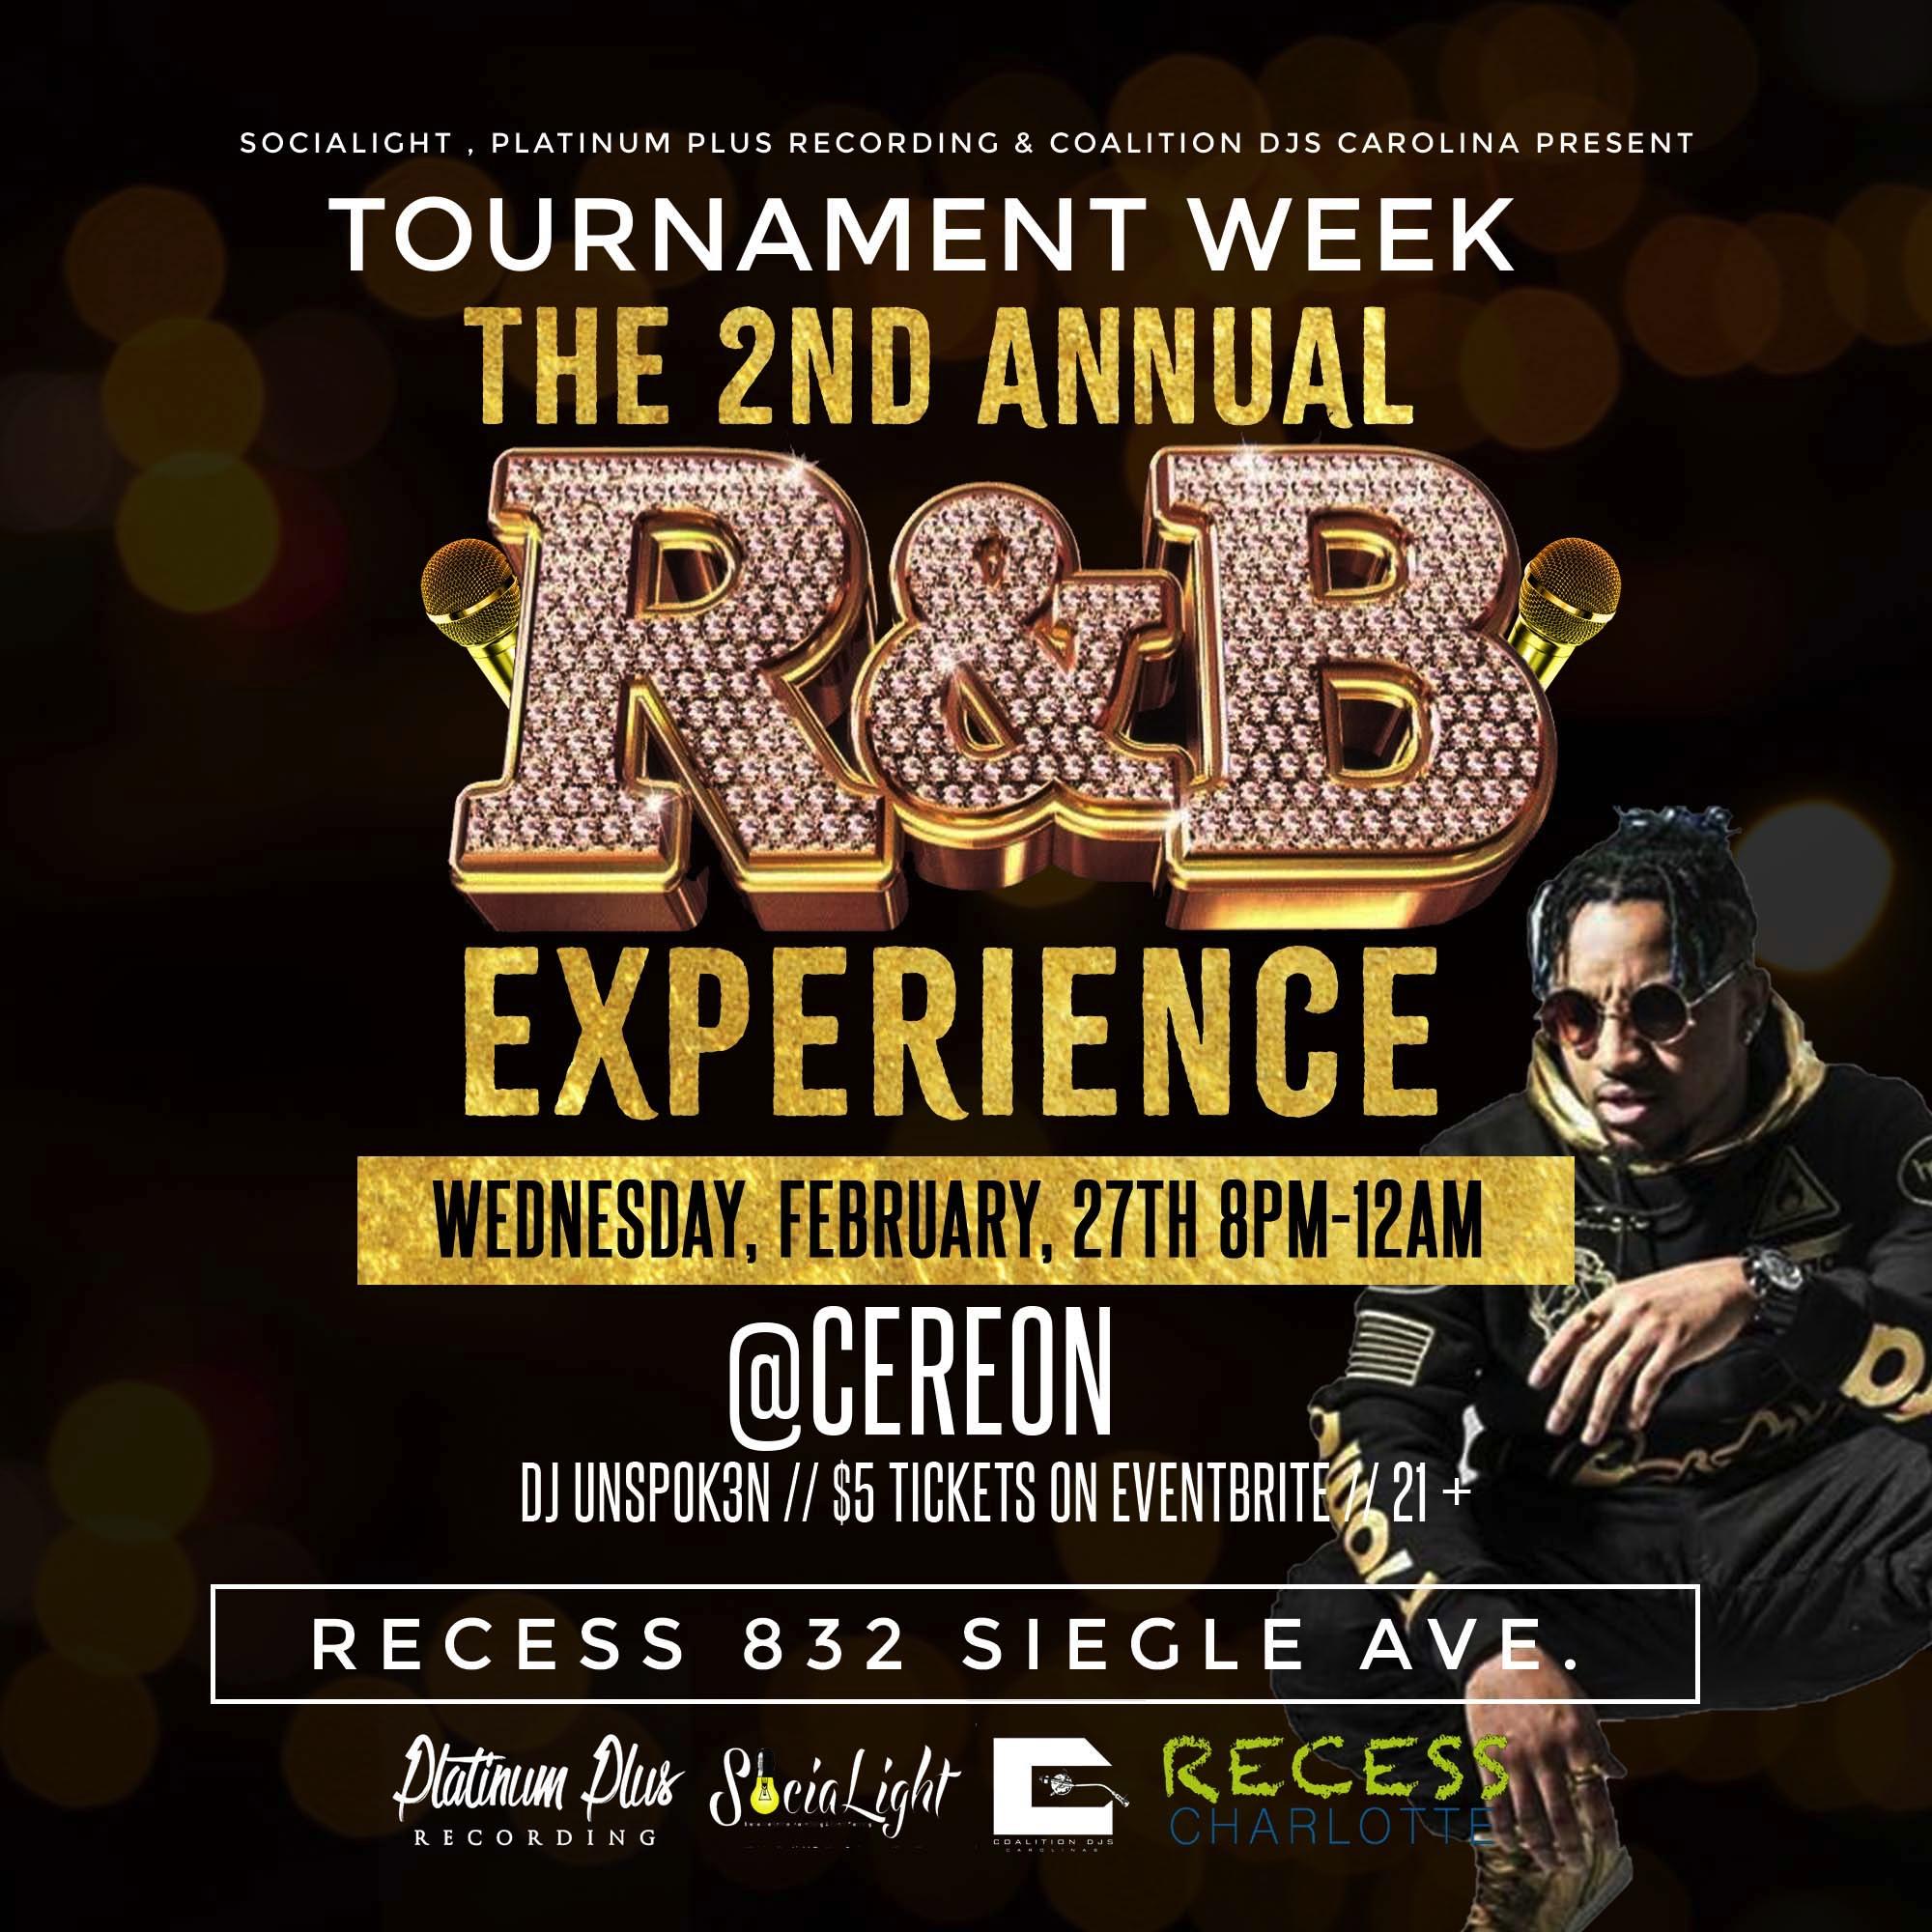 The 2nd Annual Tournament Week R&B Experience